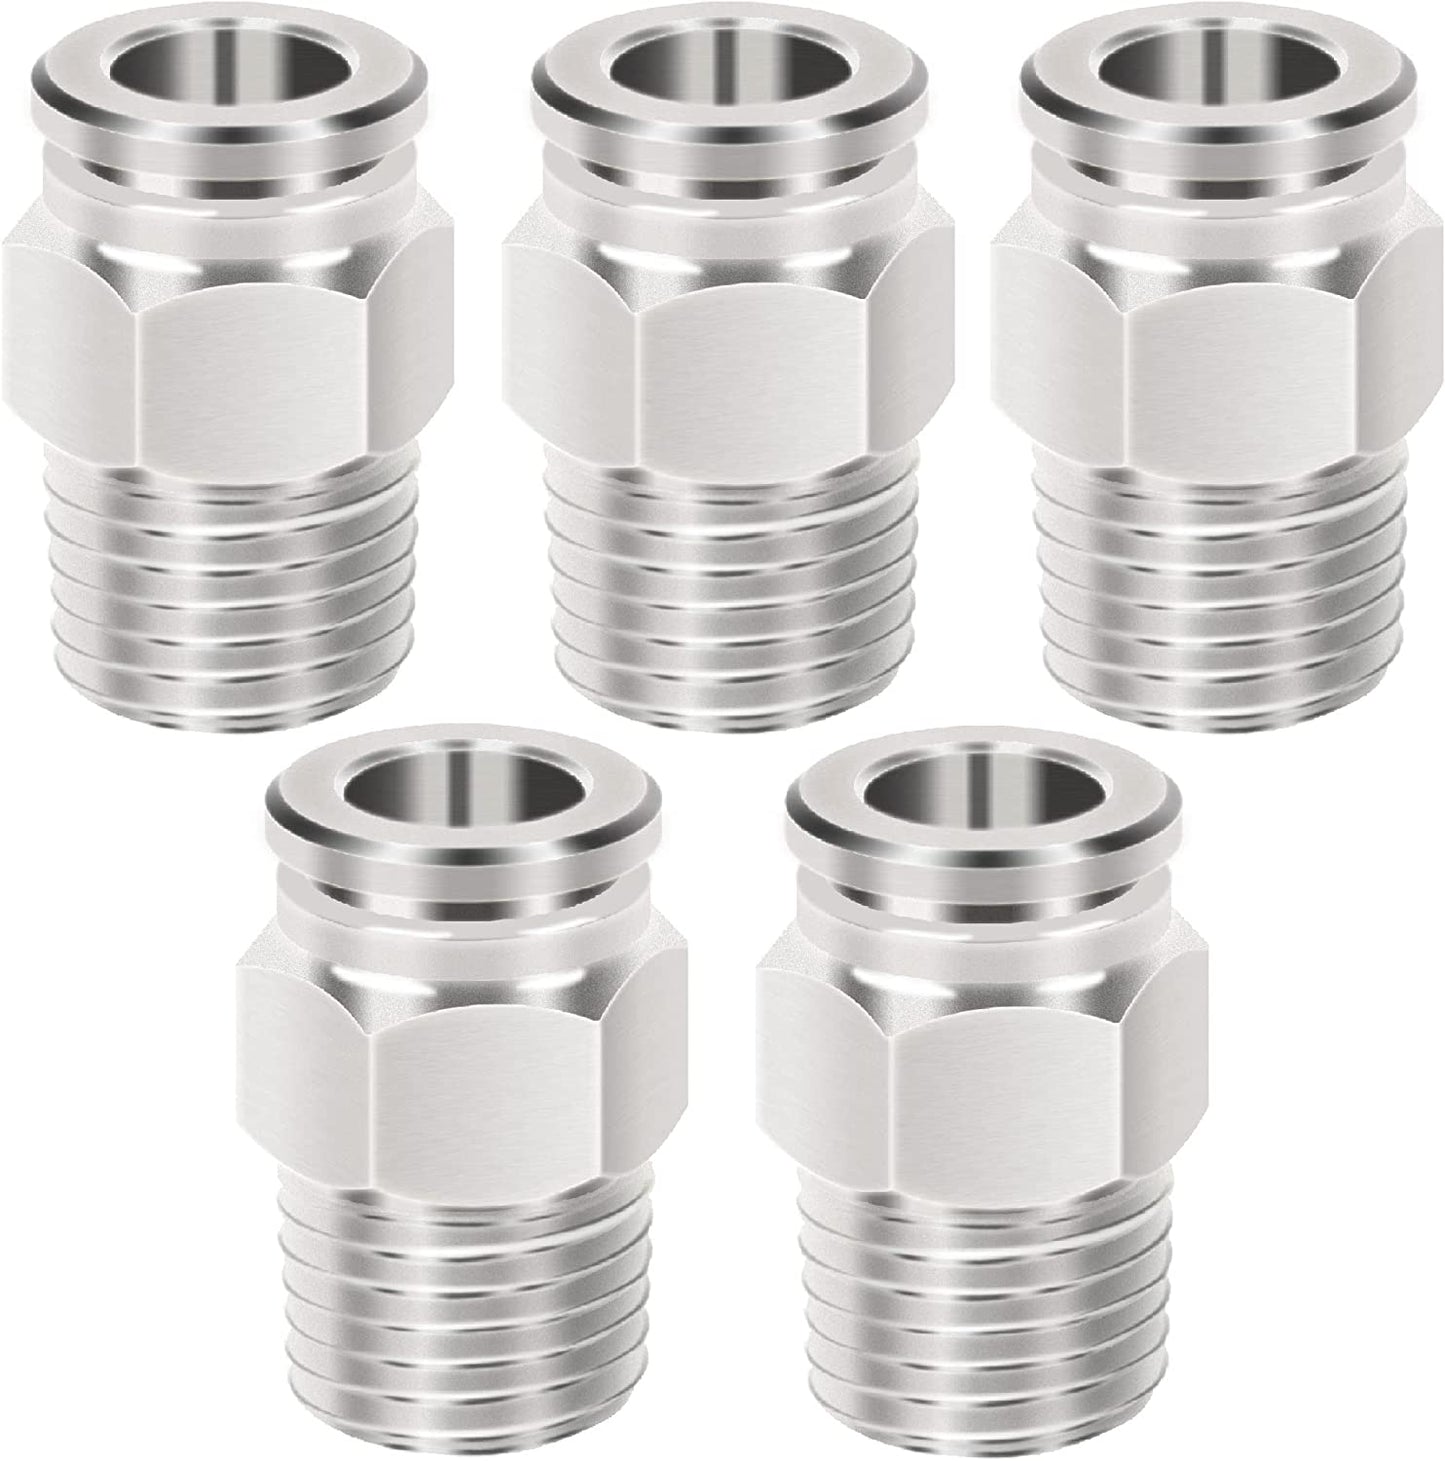 Pneumatic BPC Nickel-Plated Brass Push to Connect Air Fitting, 3/8" Tube OD X 1/4" NPT Male Thread Straight Push Lock Fitting (Pack of 5)